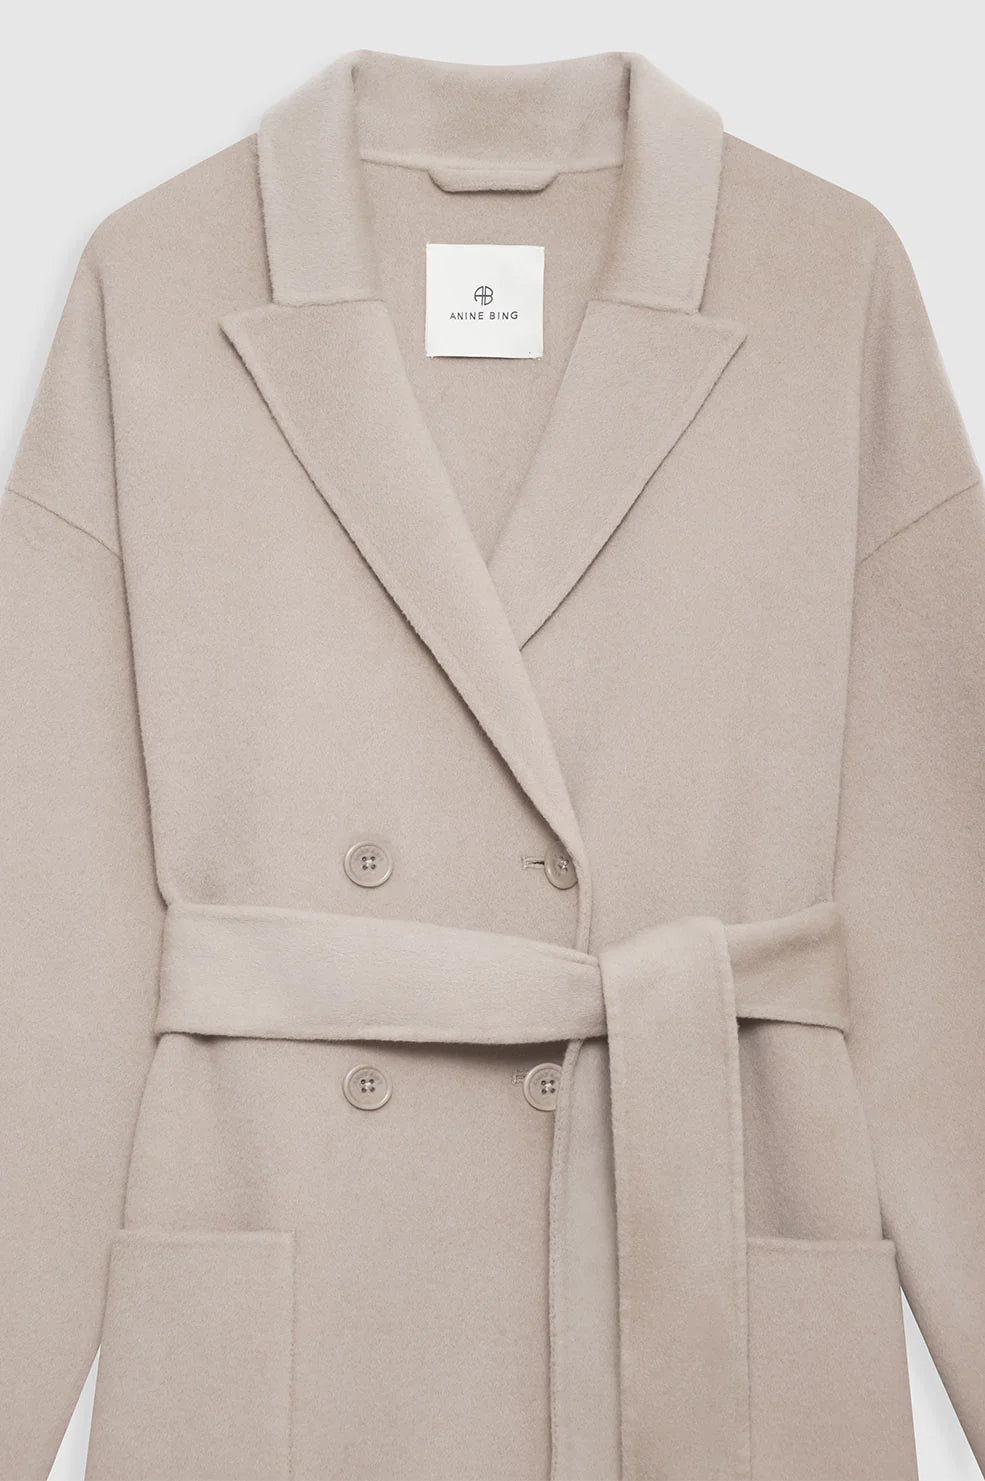 Dylan Maxi Coat in Taupe Cashmere Blend